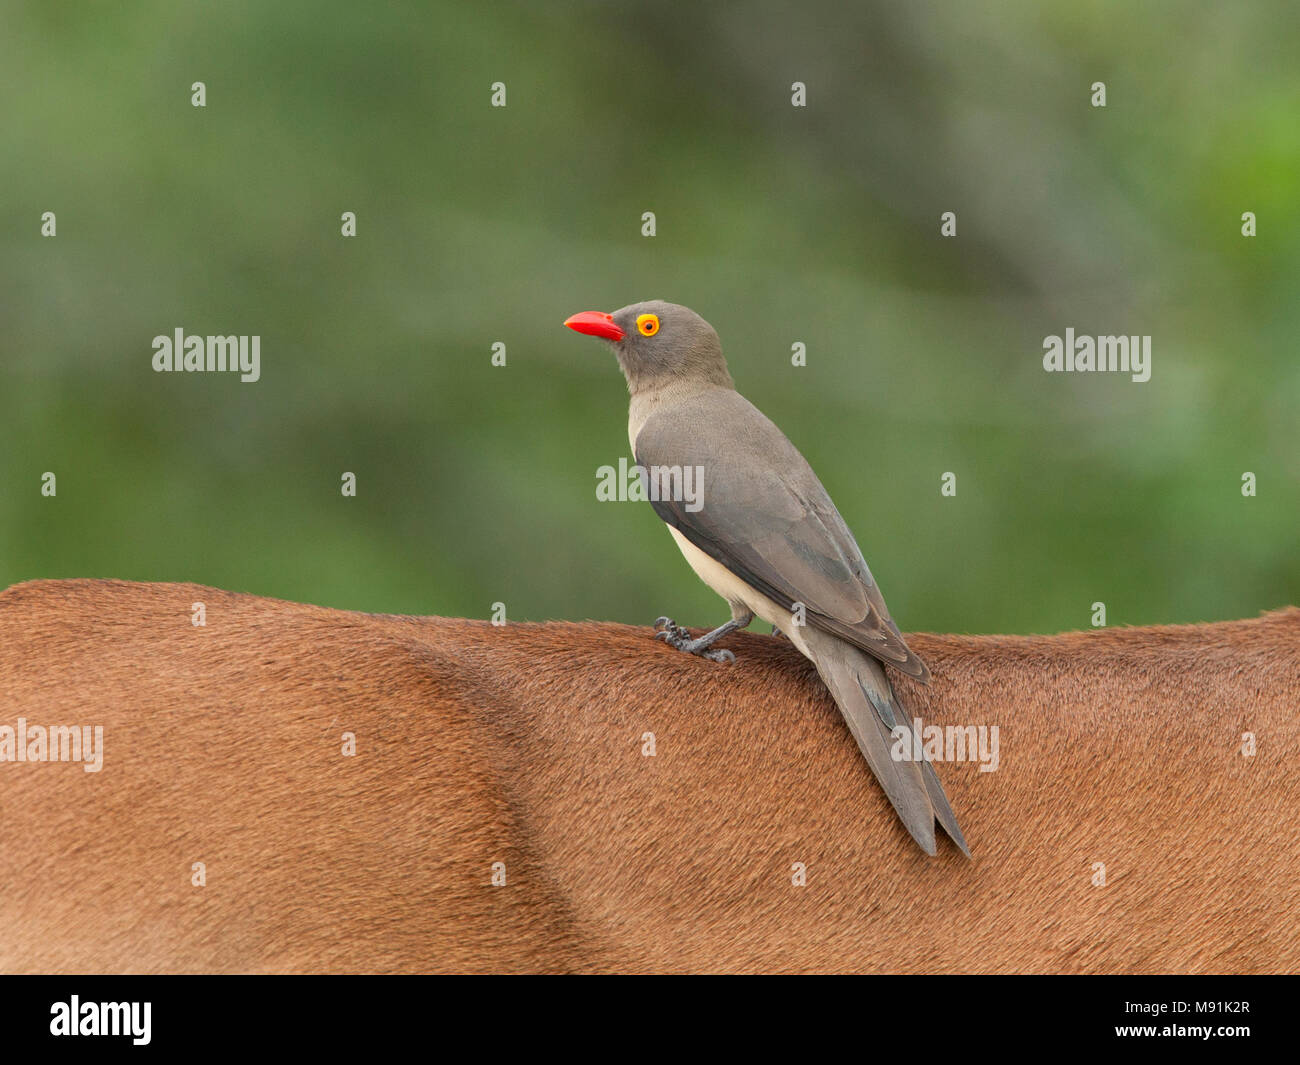 Roodsnavelossenpikker op de rug van een impala, Red-billed Oxpecker at the back of an impala Stock Photo